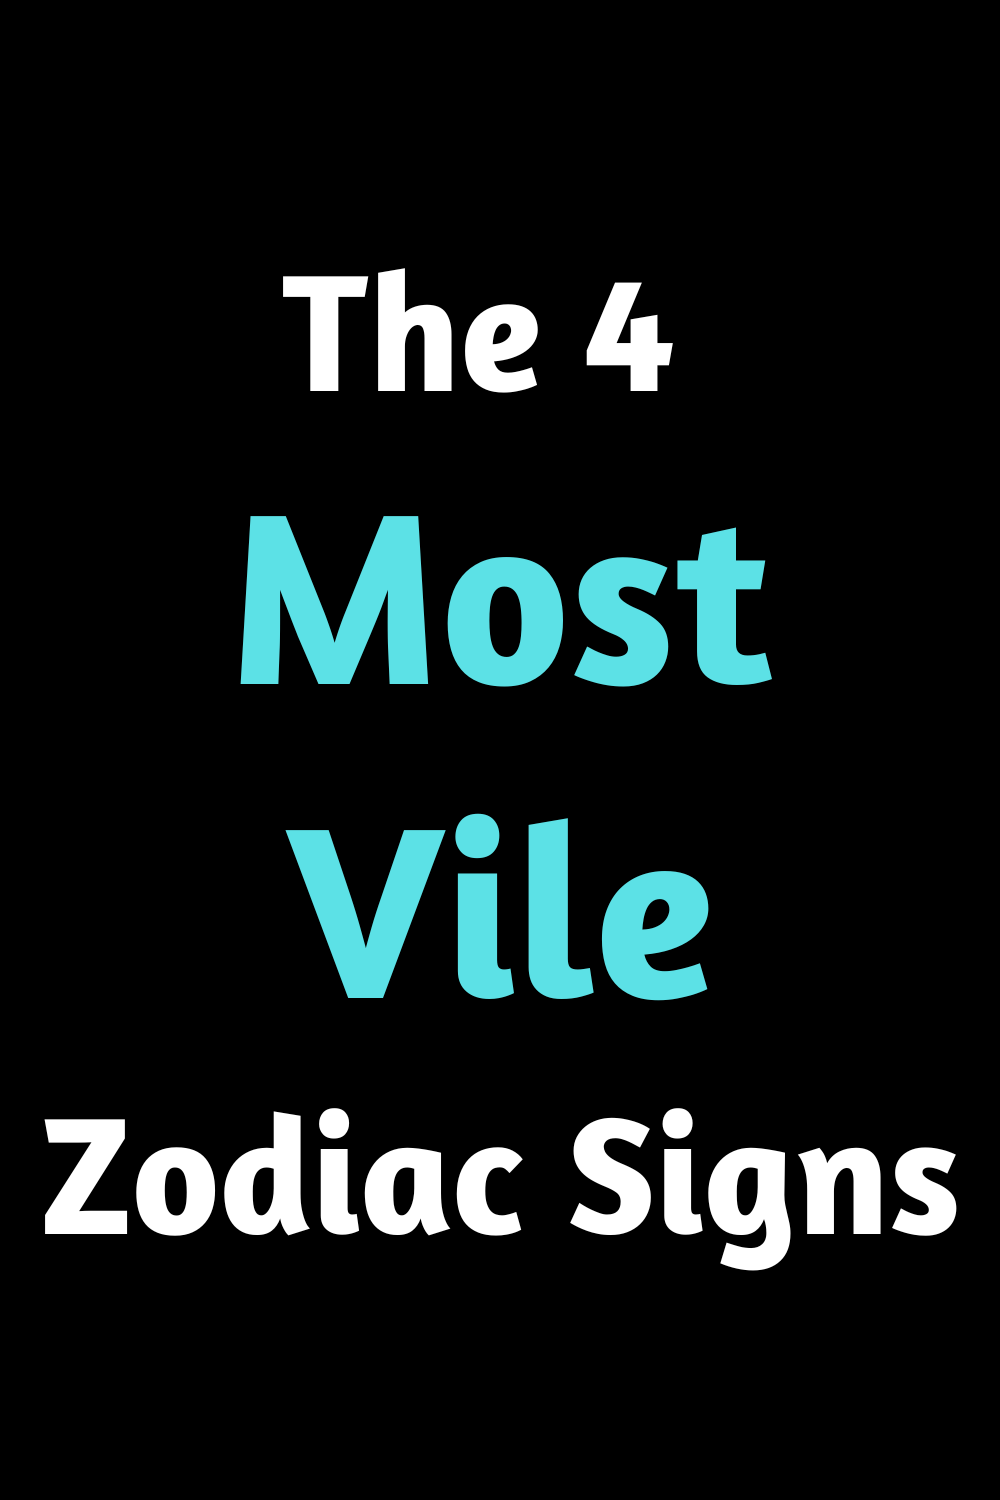 The 4 Most Vile Zodiac Signs